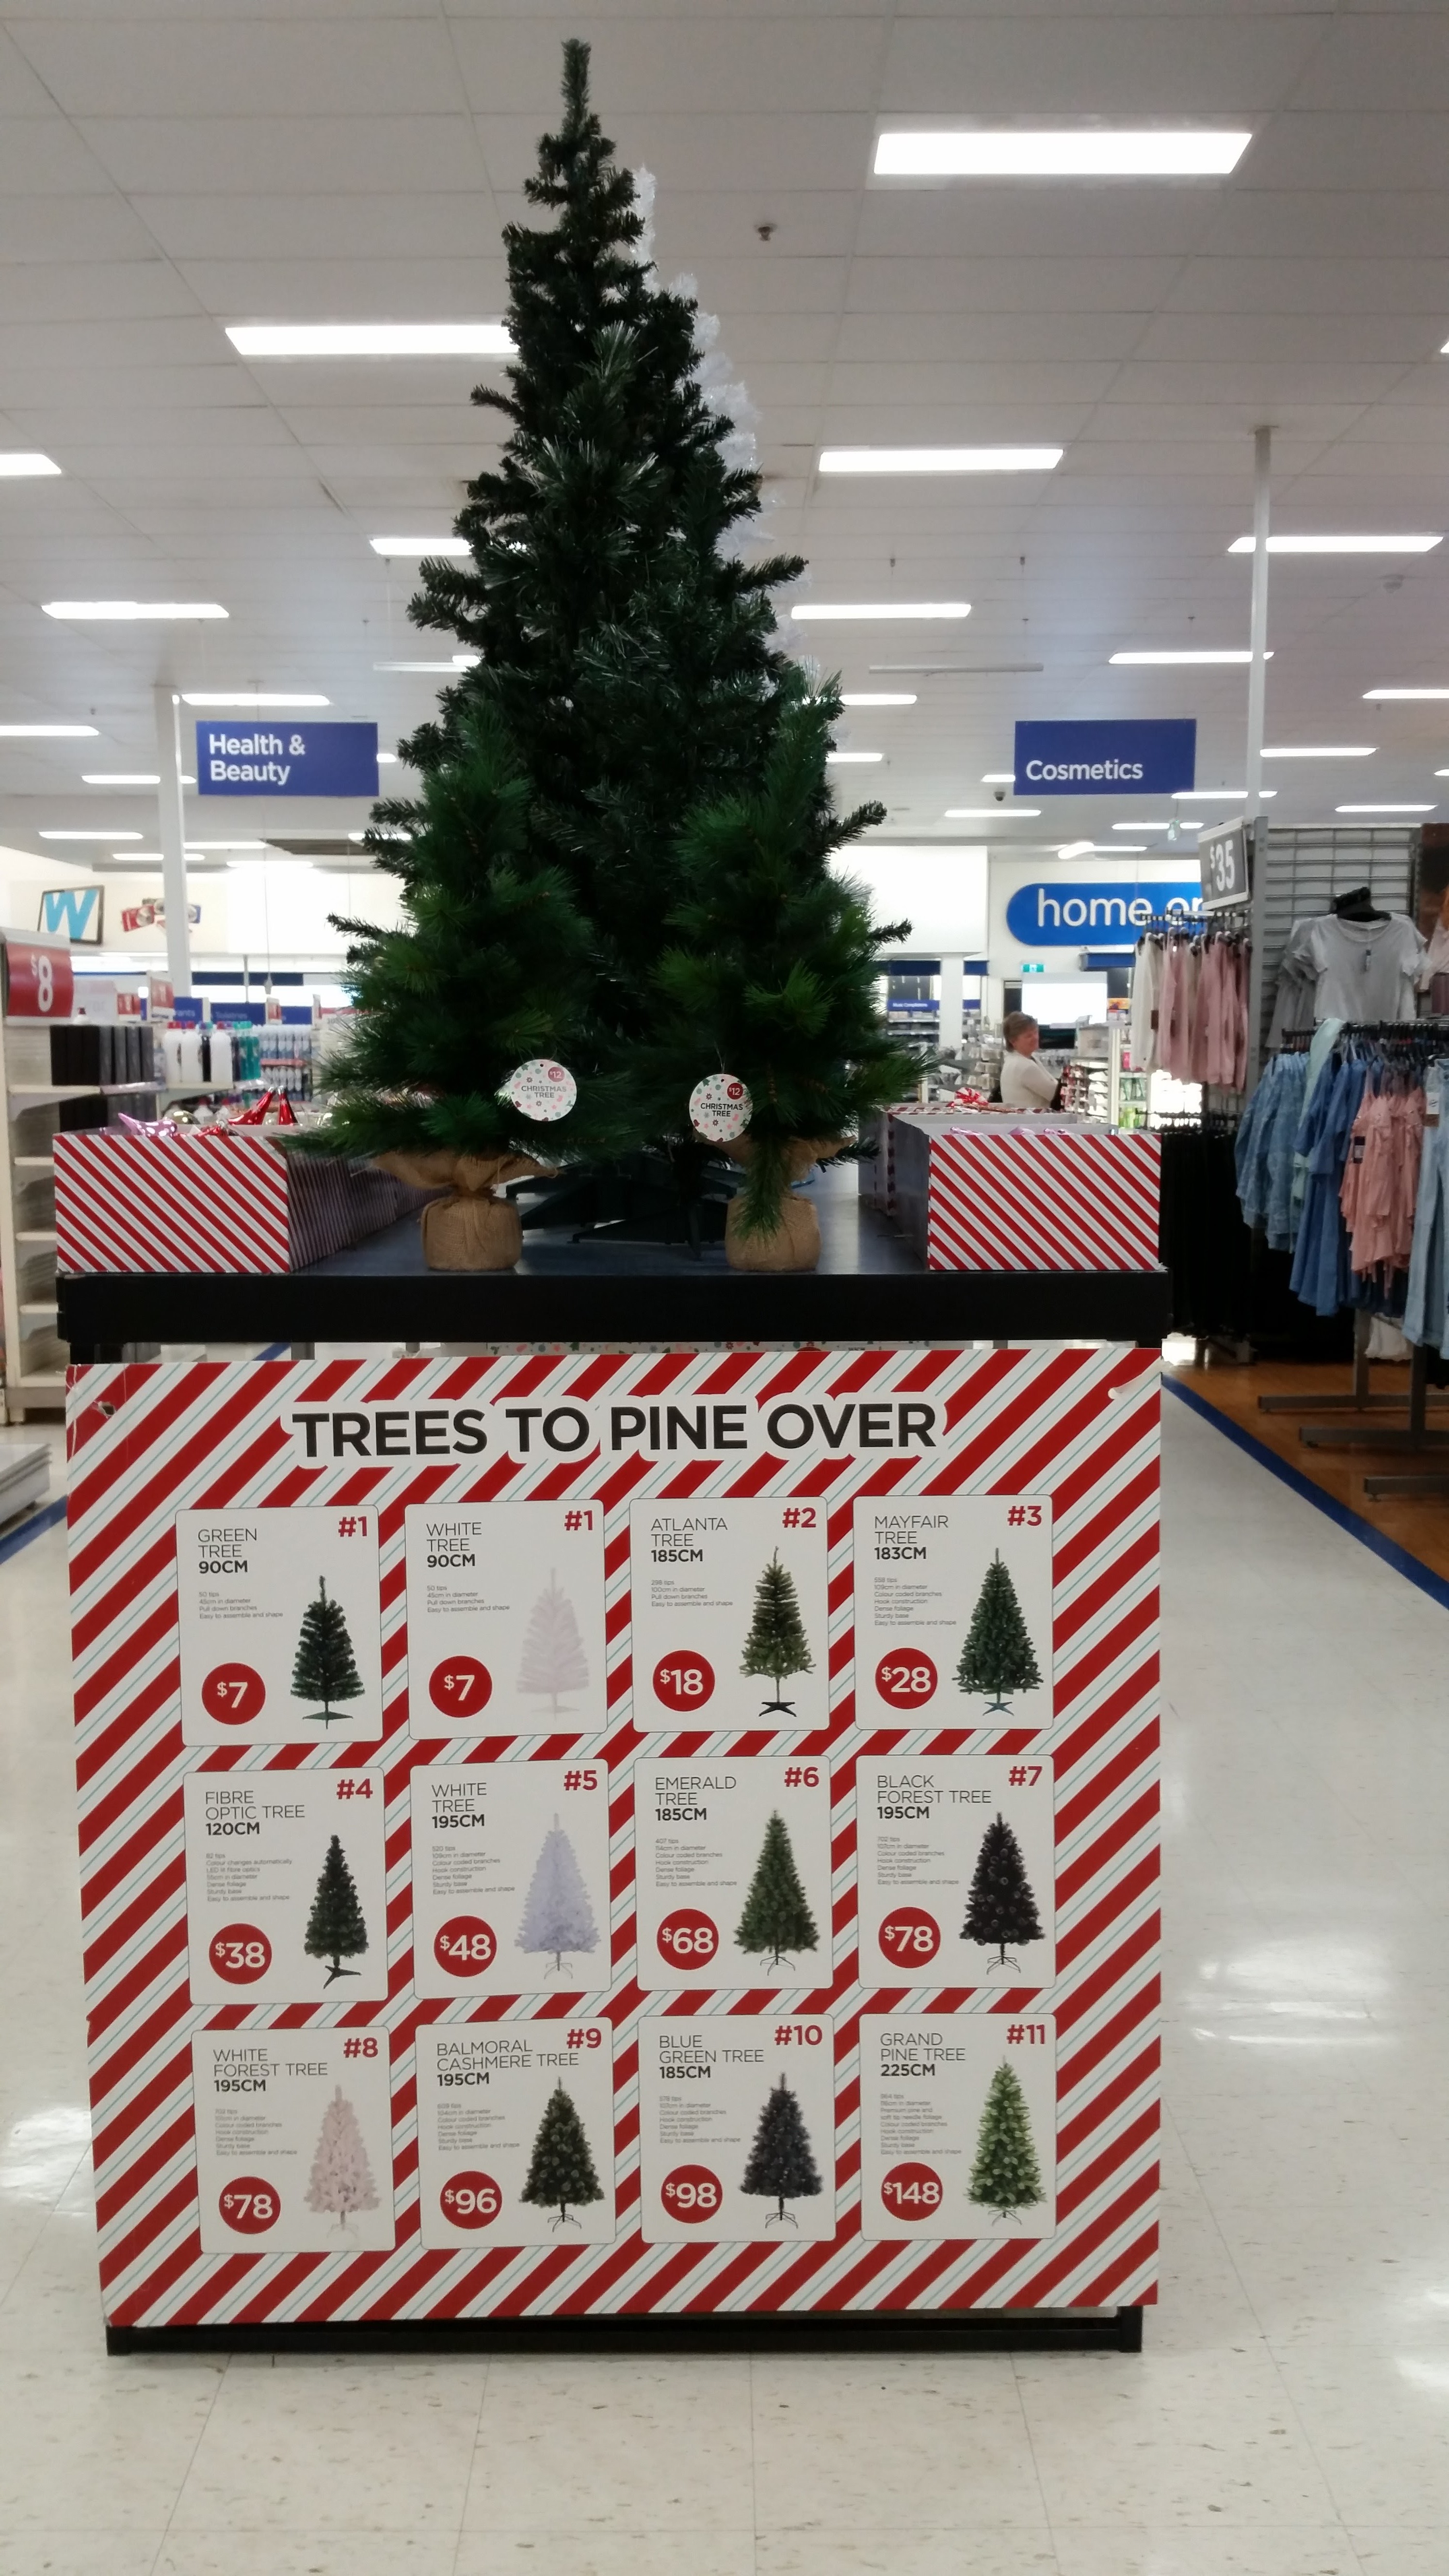 Fake news causes outrage over Christmas trees - Eternity News